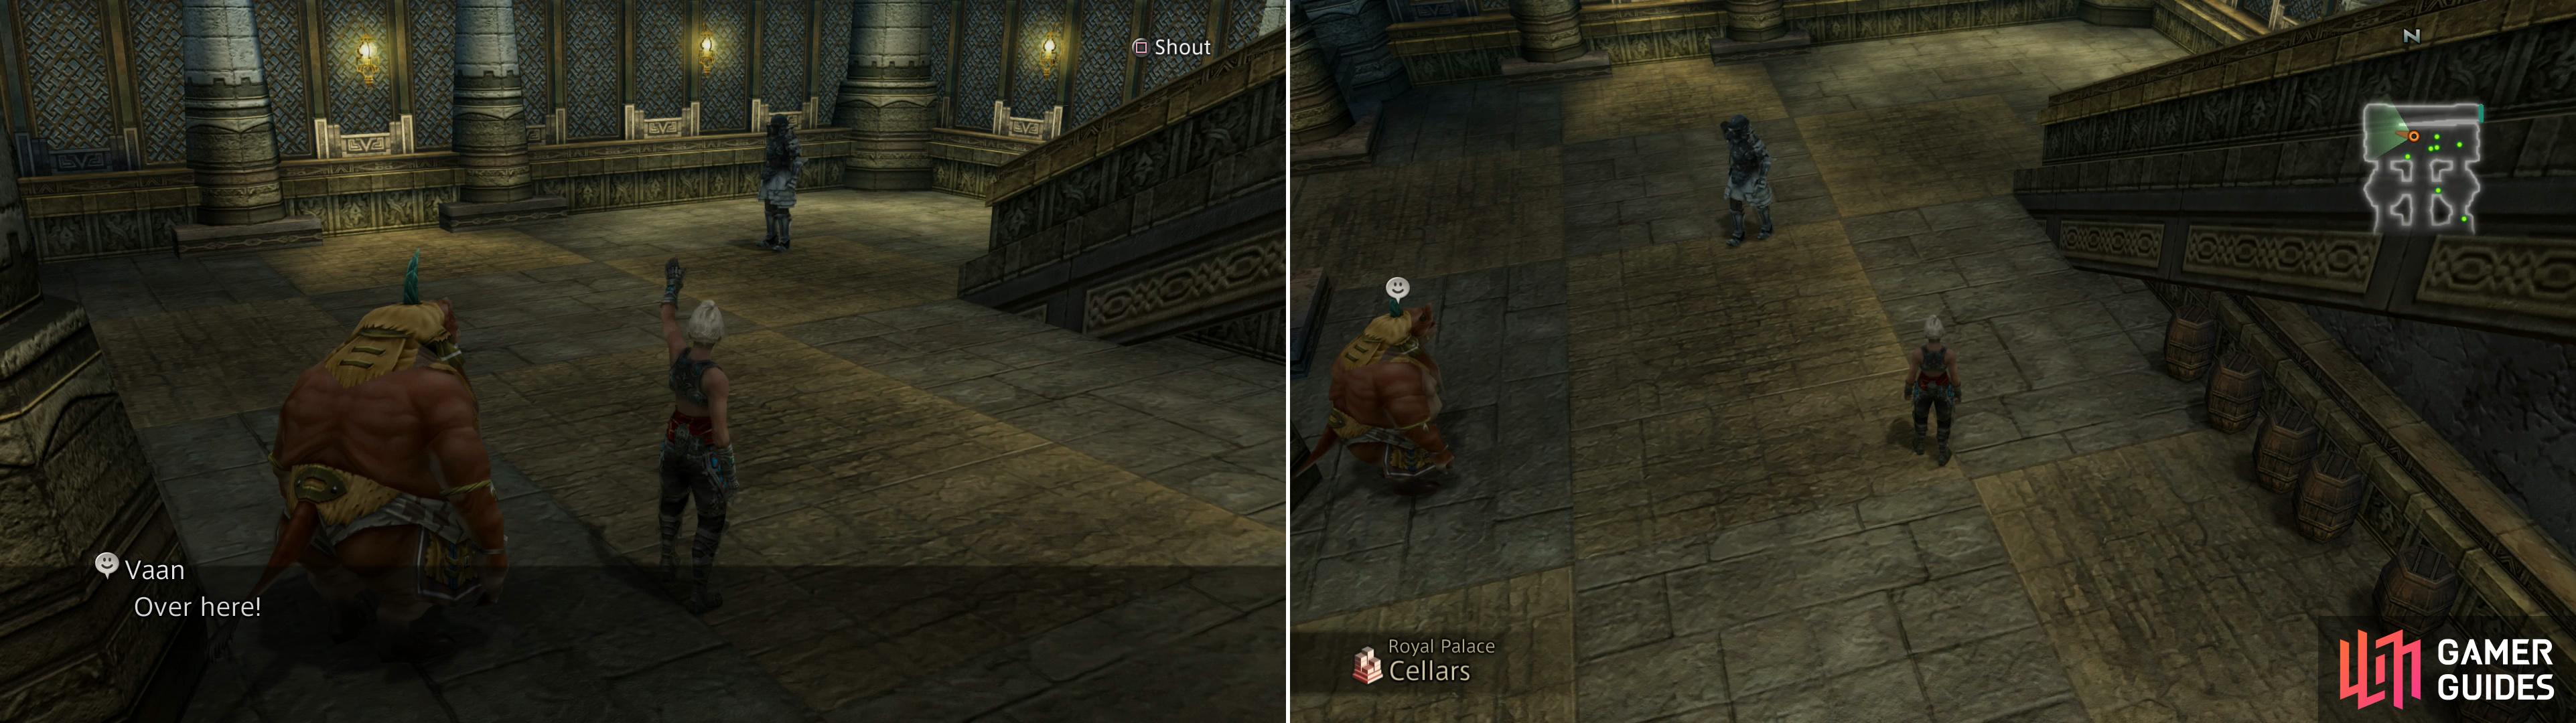 Lure the Imperial (left) then wait for him to move over to the Seeq and calmly walk around him (right).